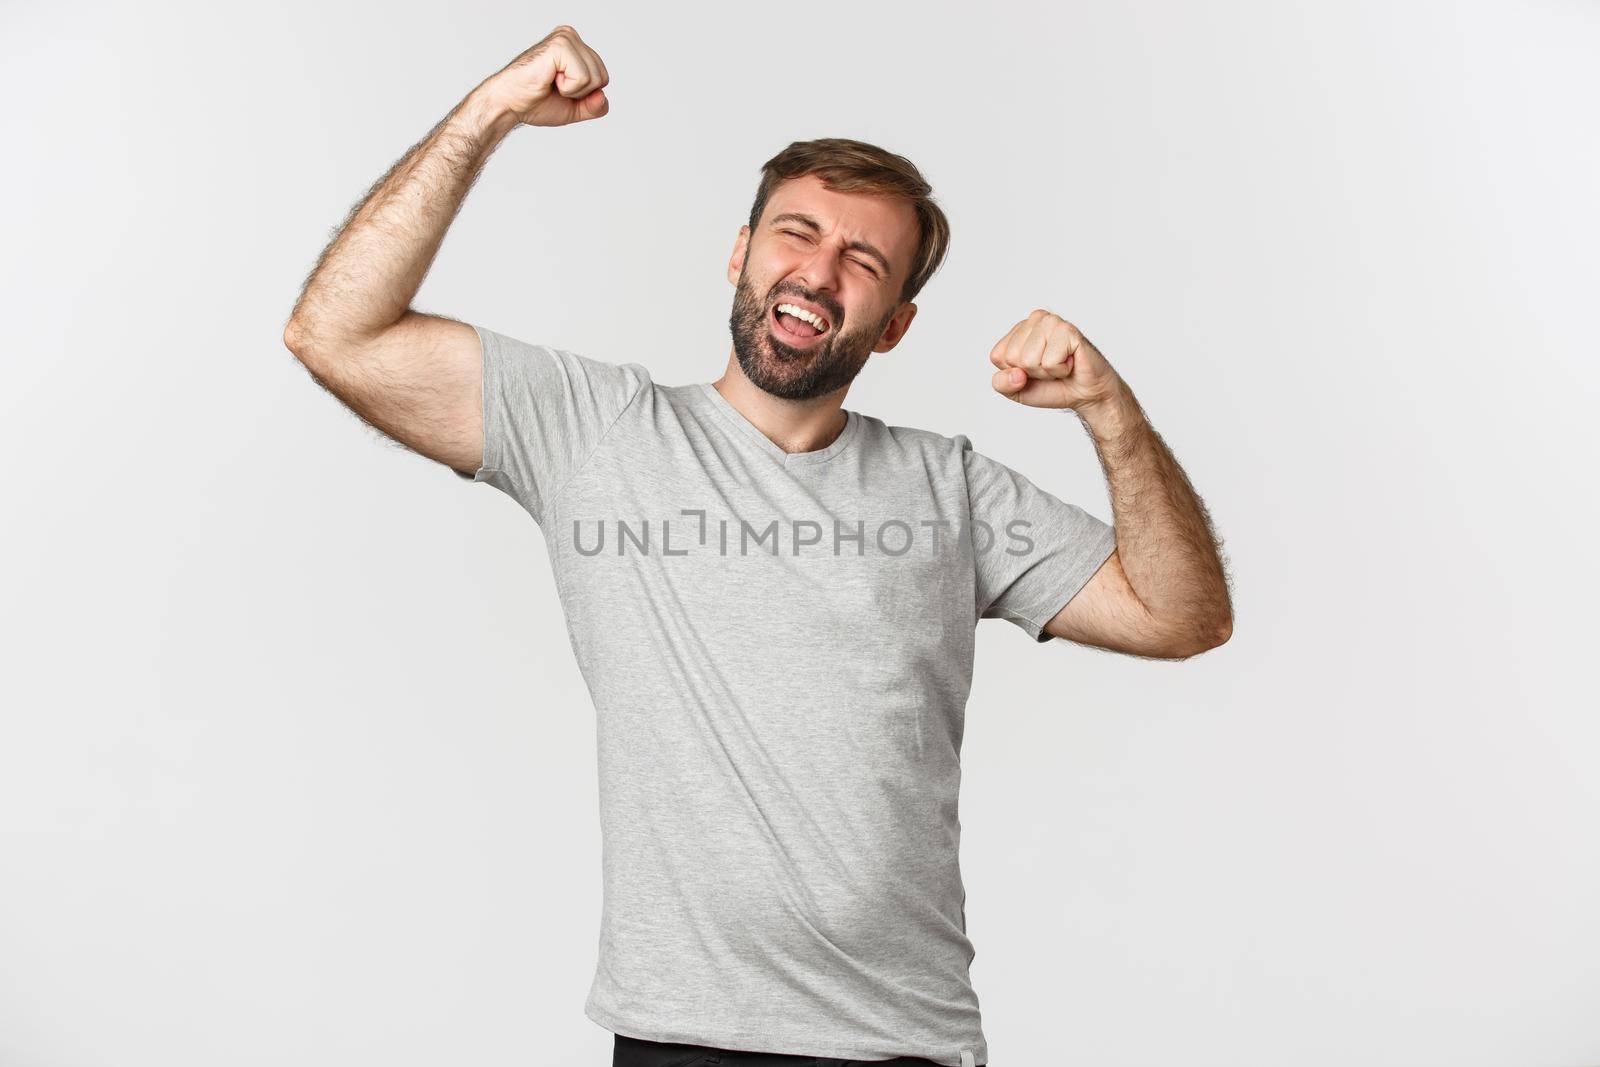 Portrait of excited and happy man in gray t-shirt, making fist pump and shouting yes to celebrating win, triumphing over white background.